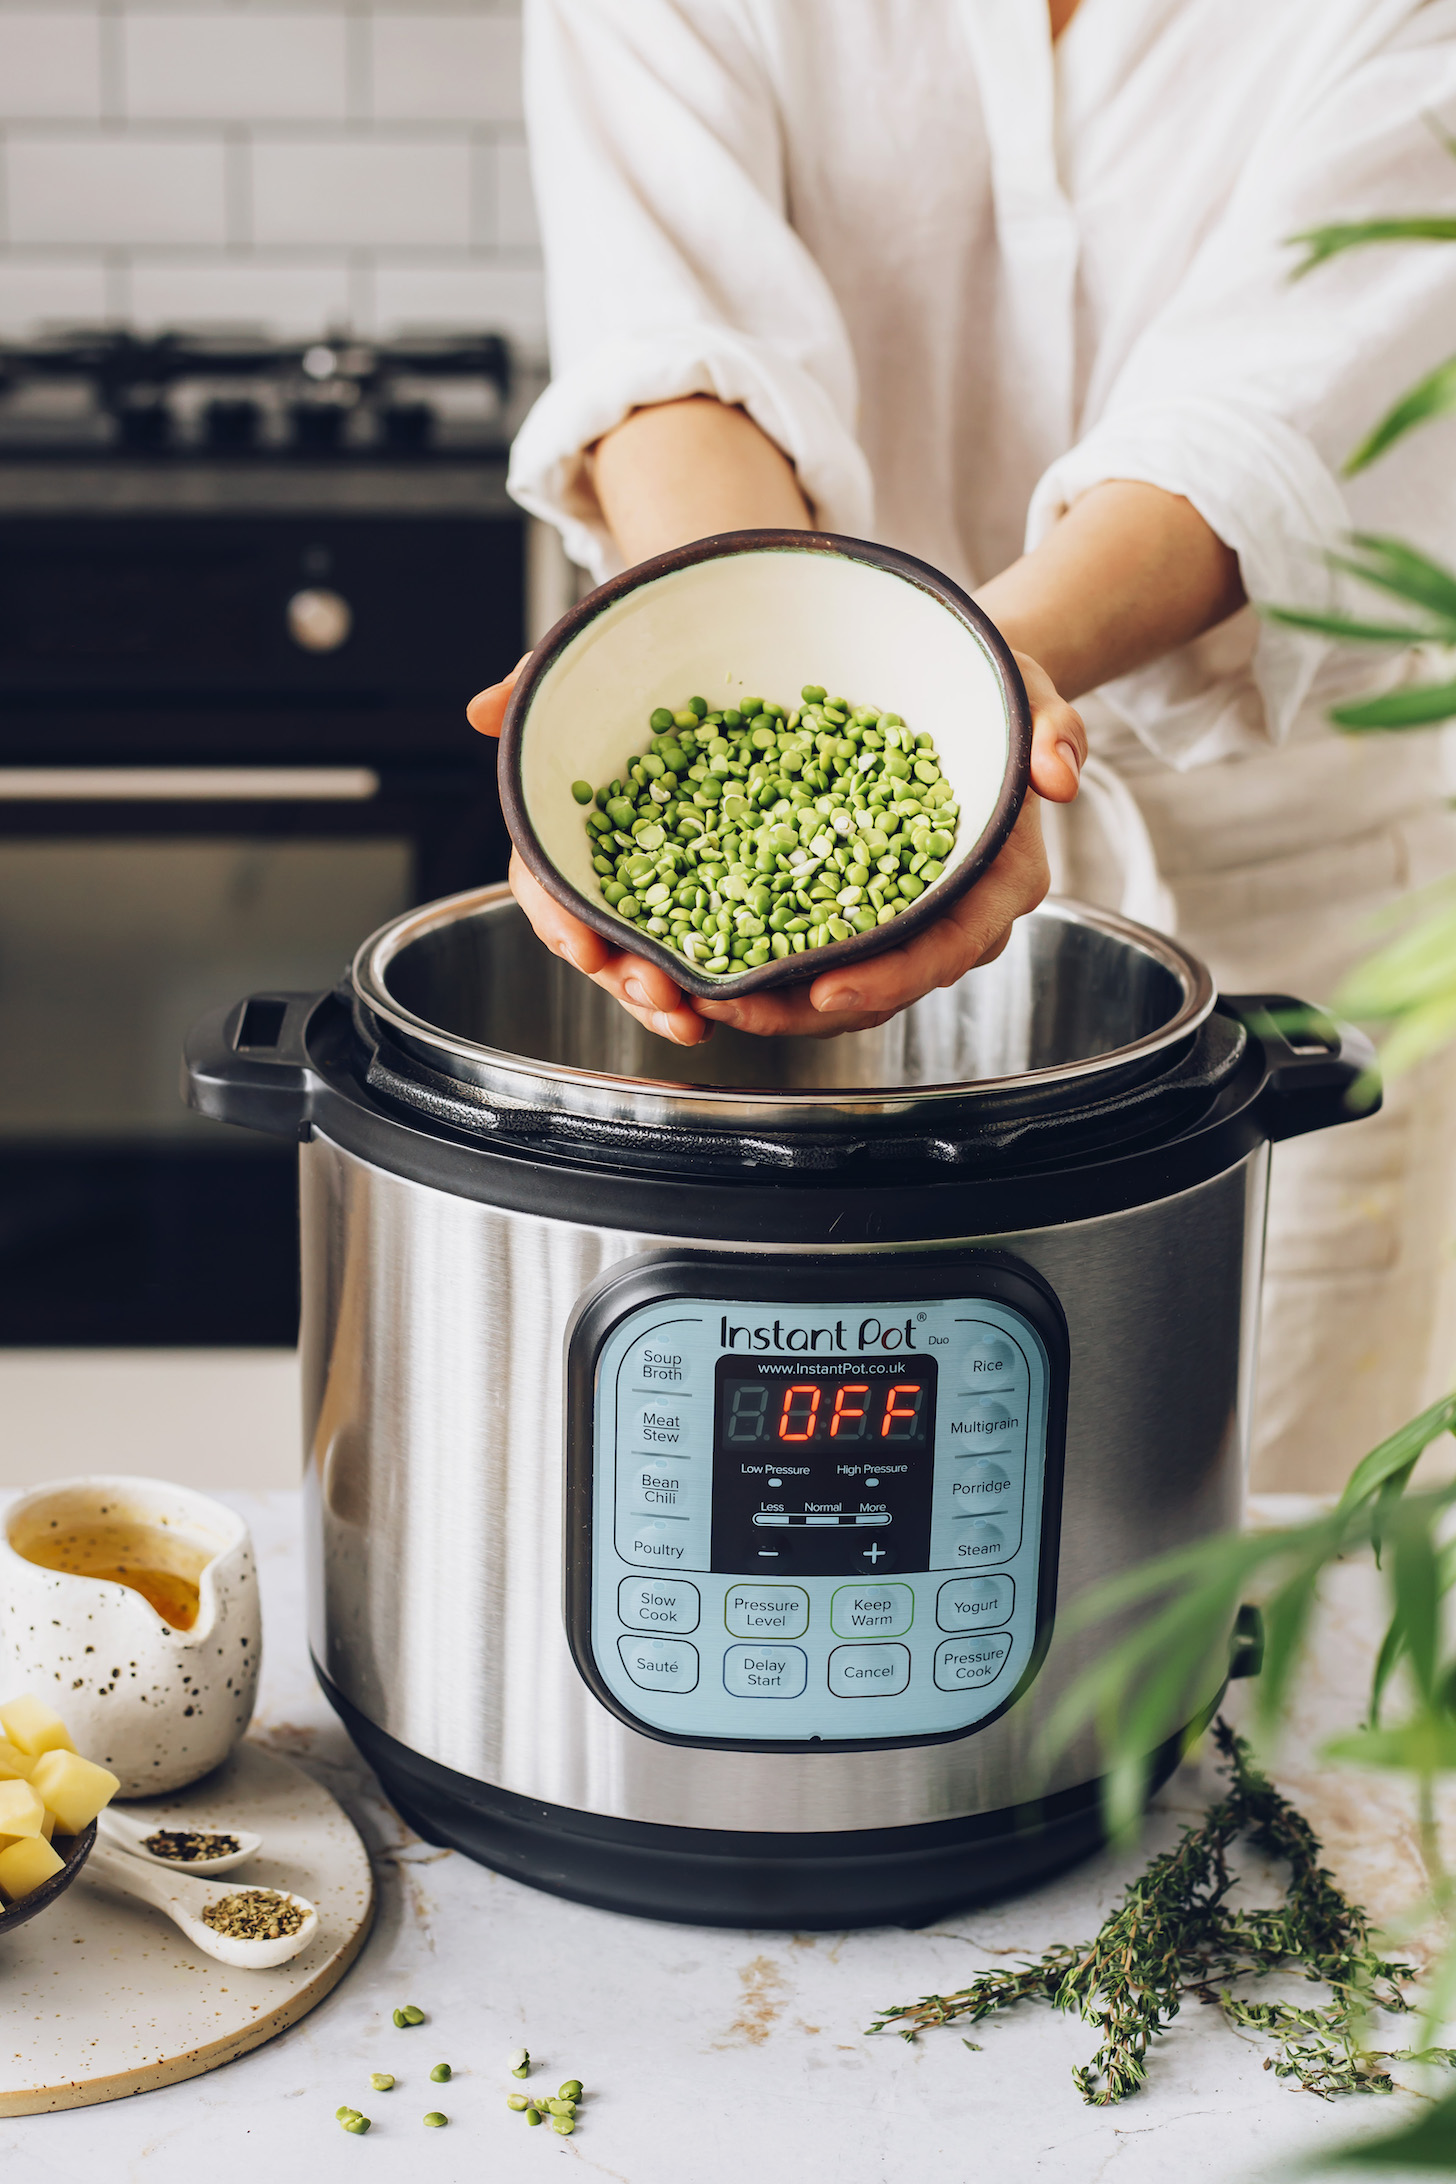 Holding a bowl of dry green split peas over an Instant Pot